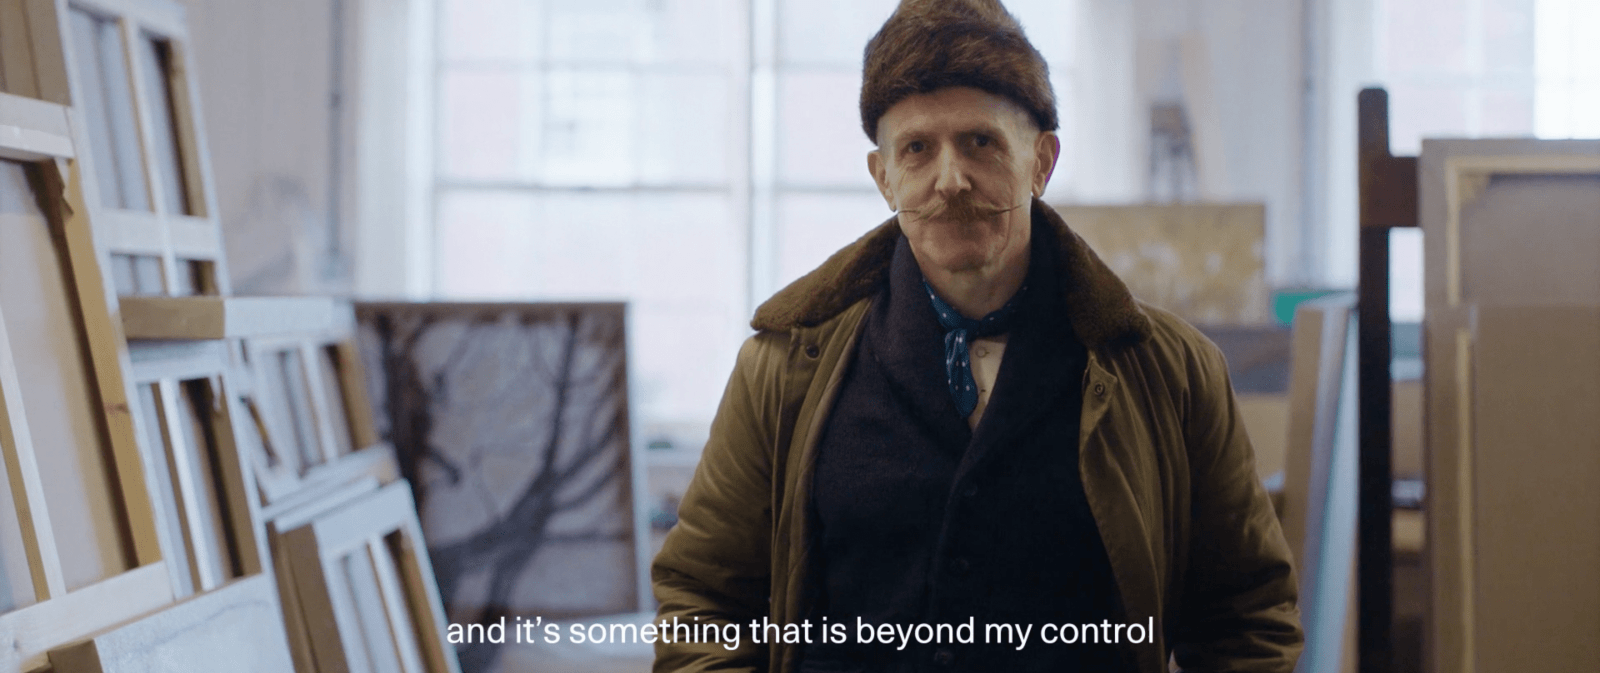 The Future of Art According to Billy Childish, April 2020